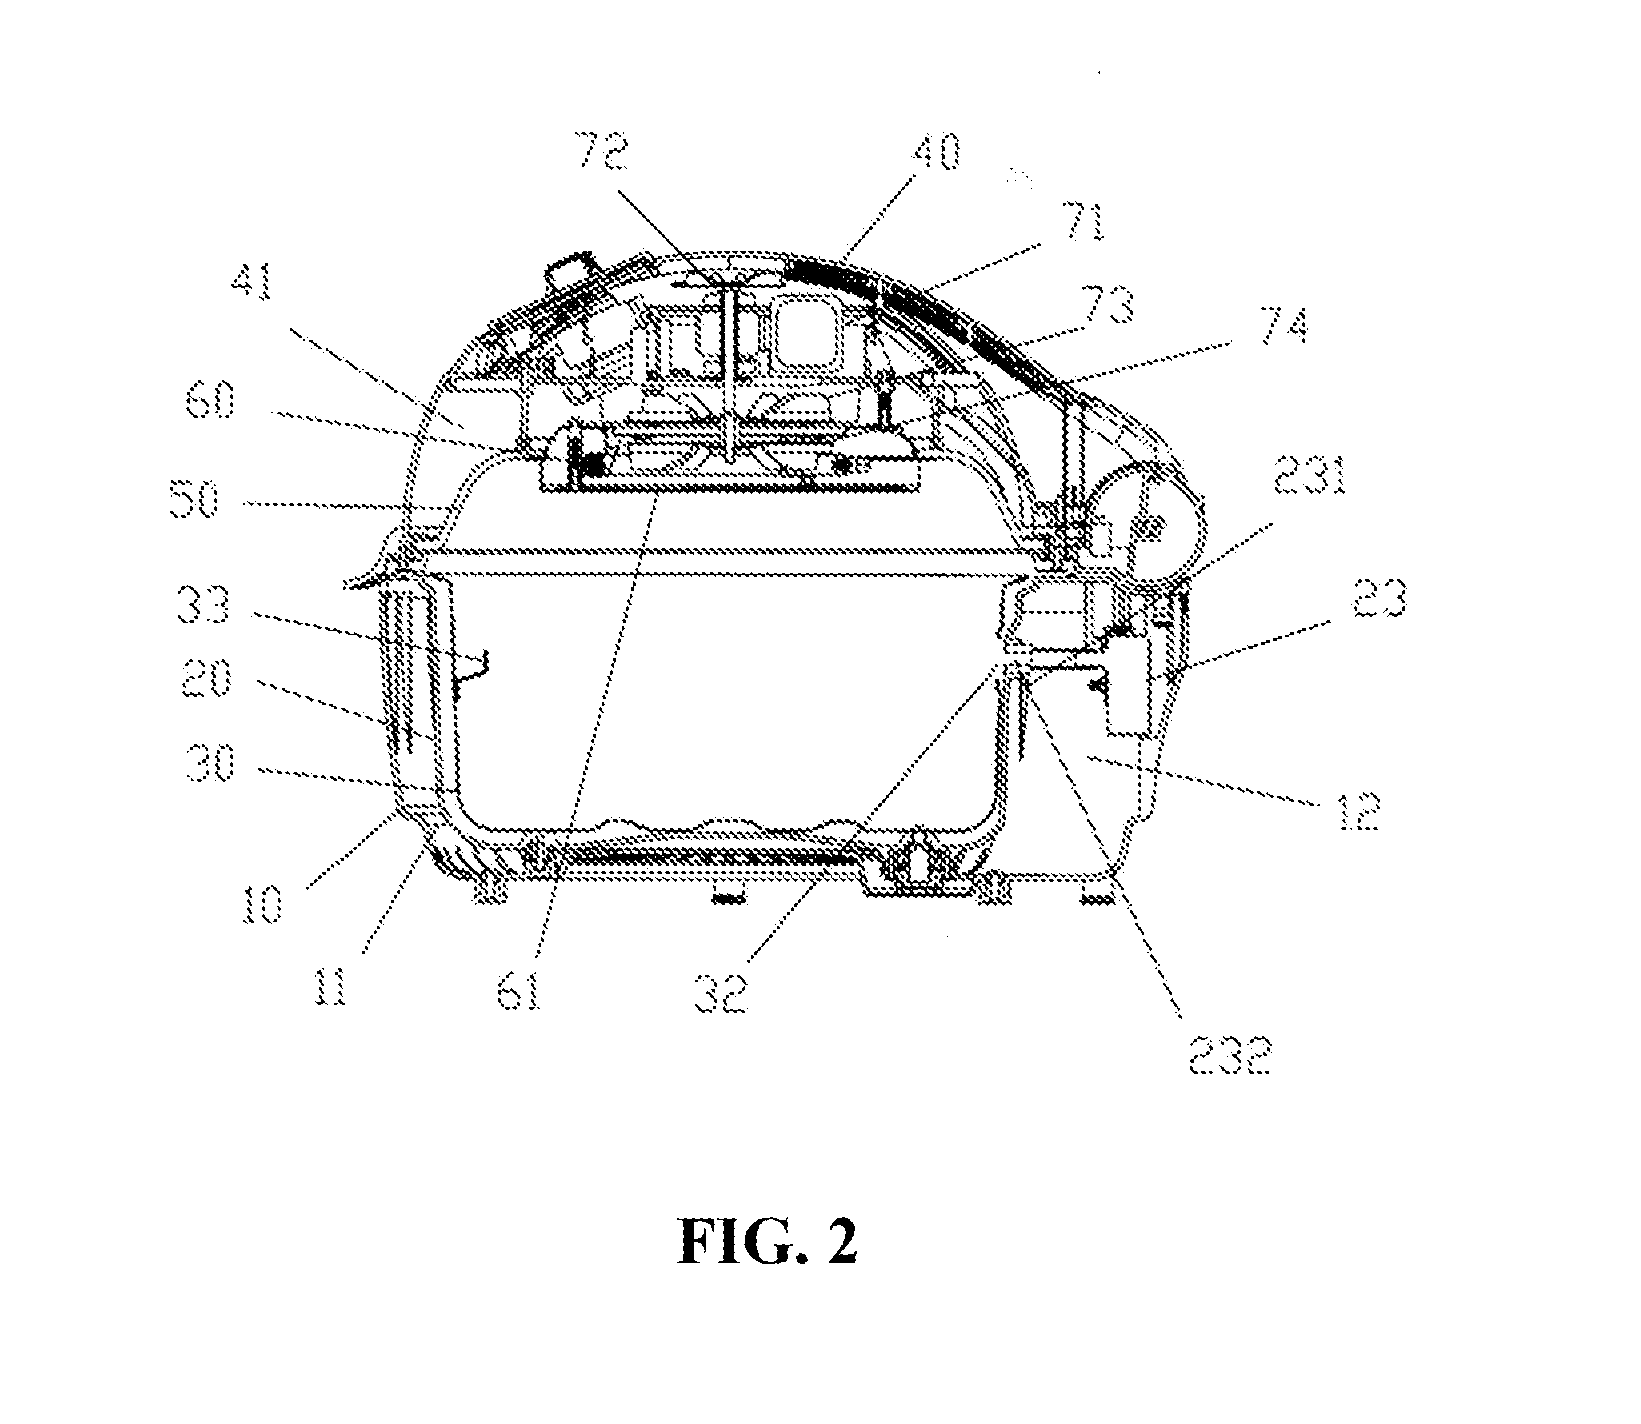 Cooking pot having rotating and rolling basket